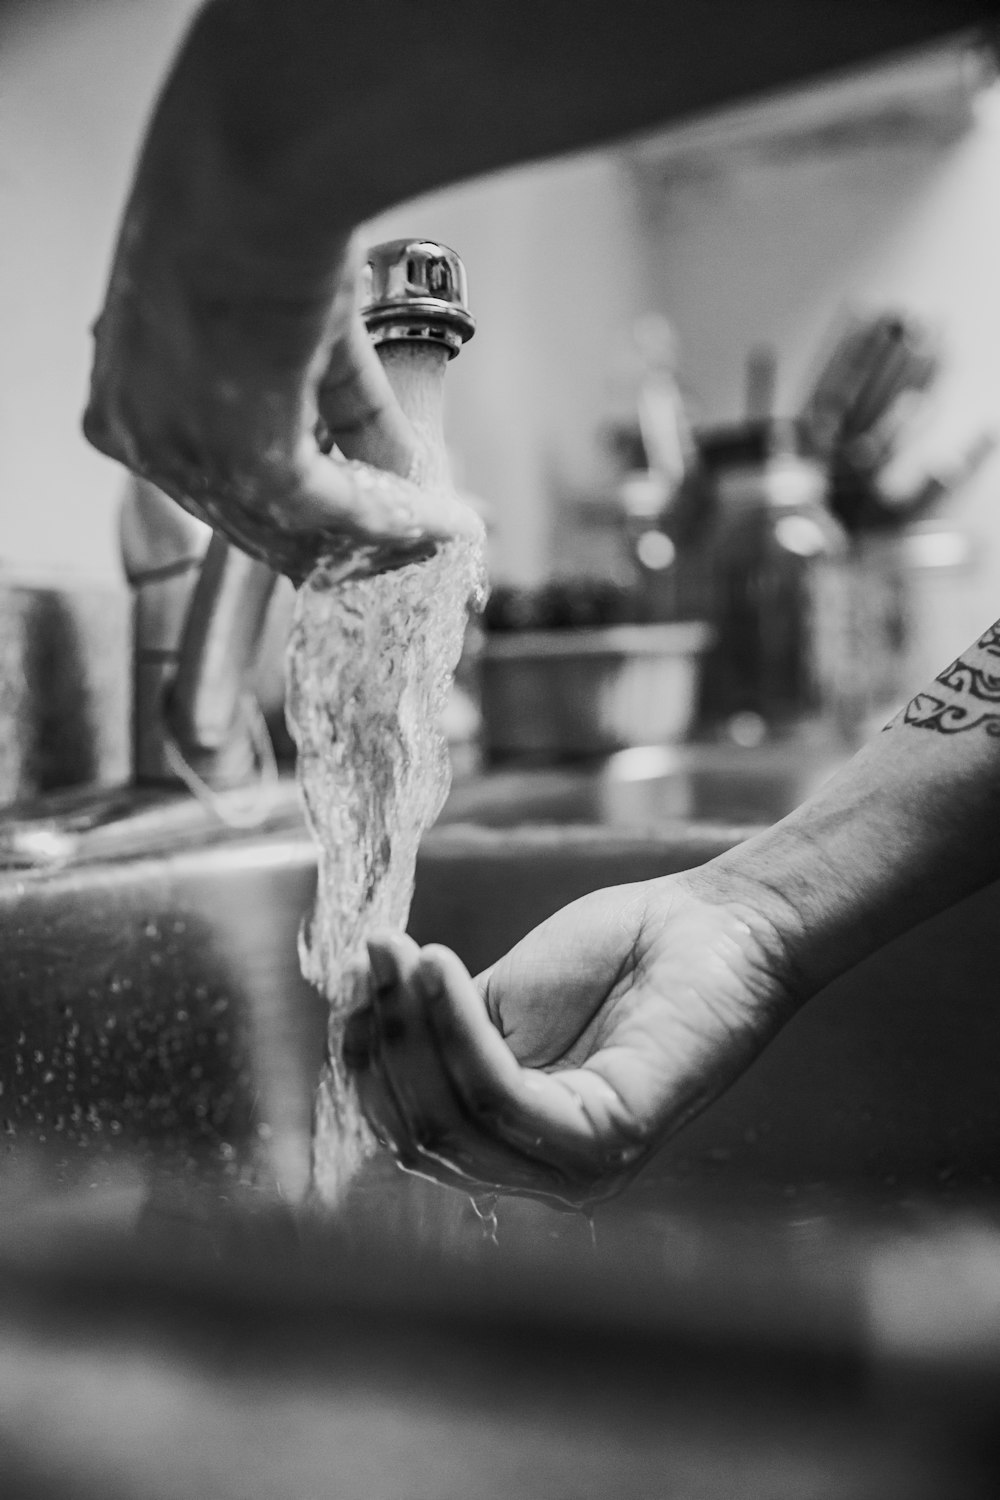 grayscale photo of person pouring water on persons hand